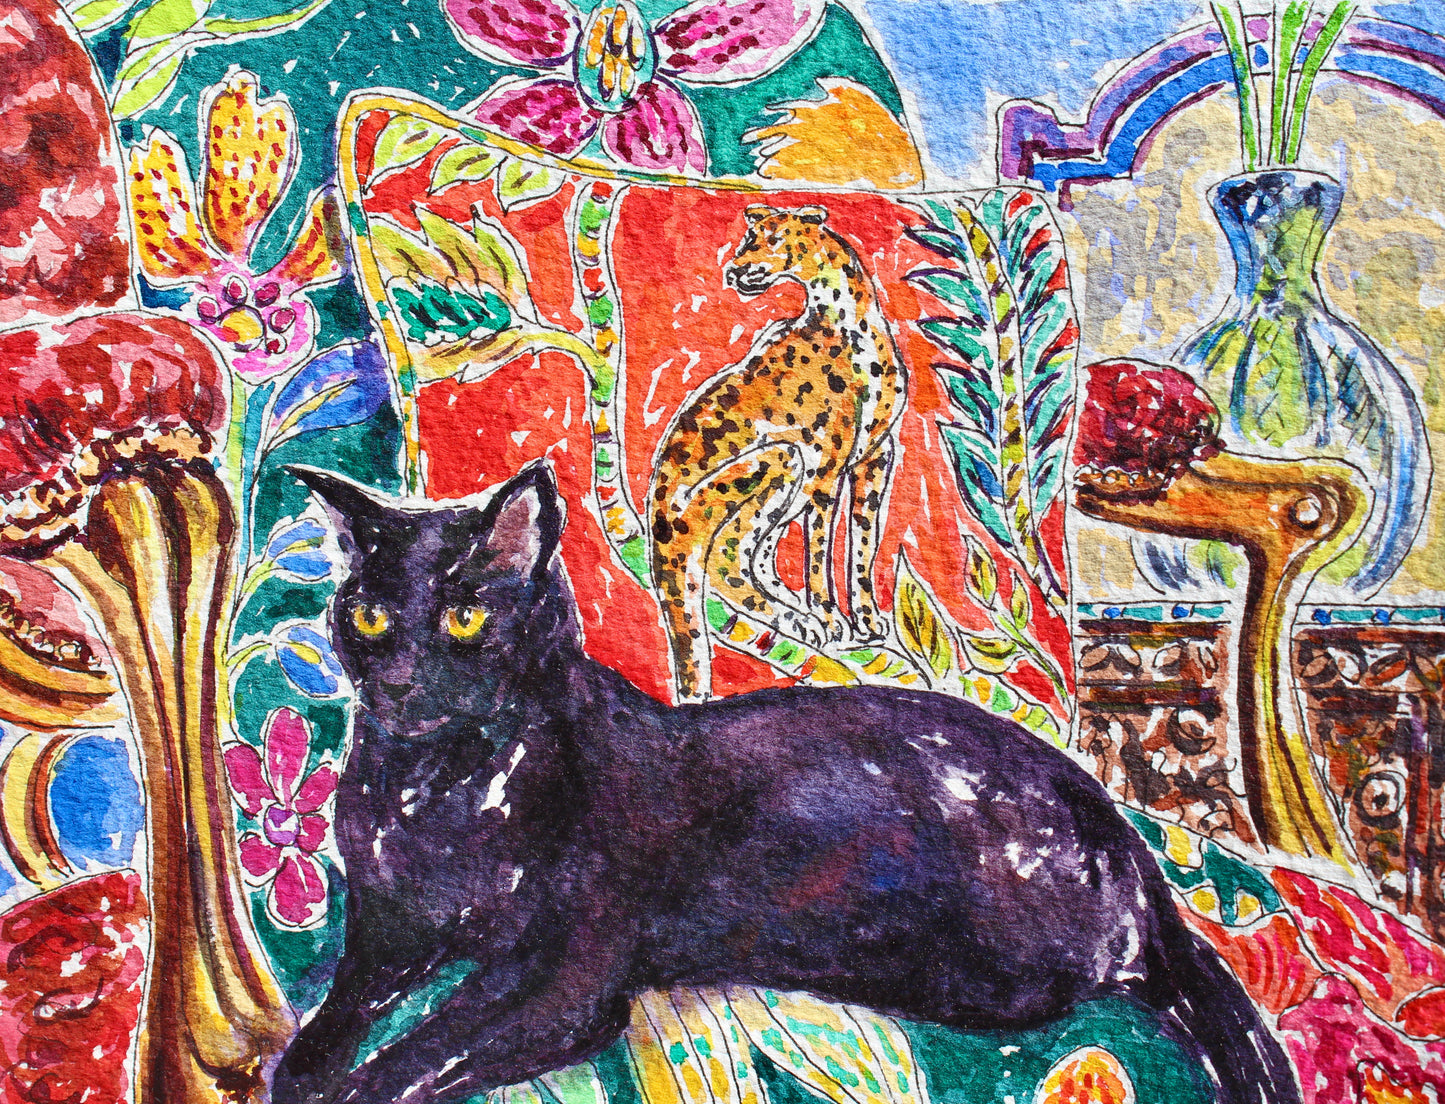 Prince Tim, An Original 7" x 7" Watercolor And Ink Painting Of A Black Cat With Colorful Fabric